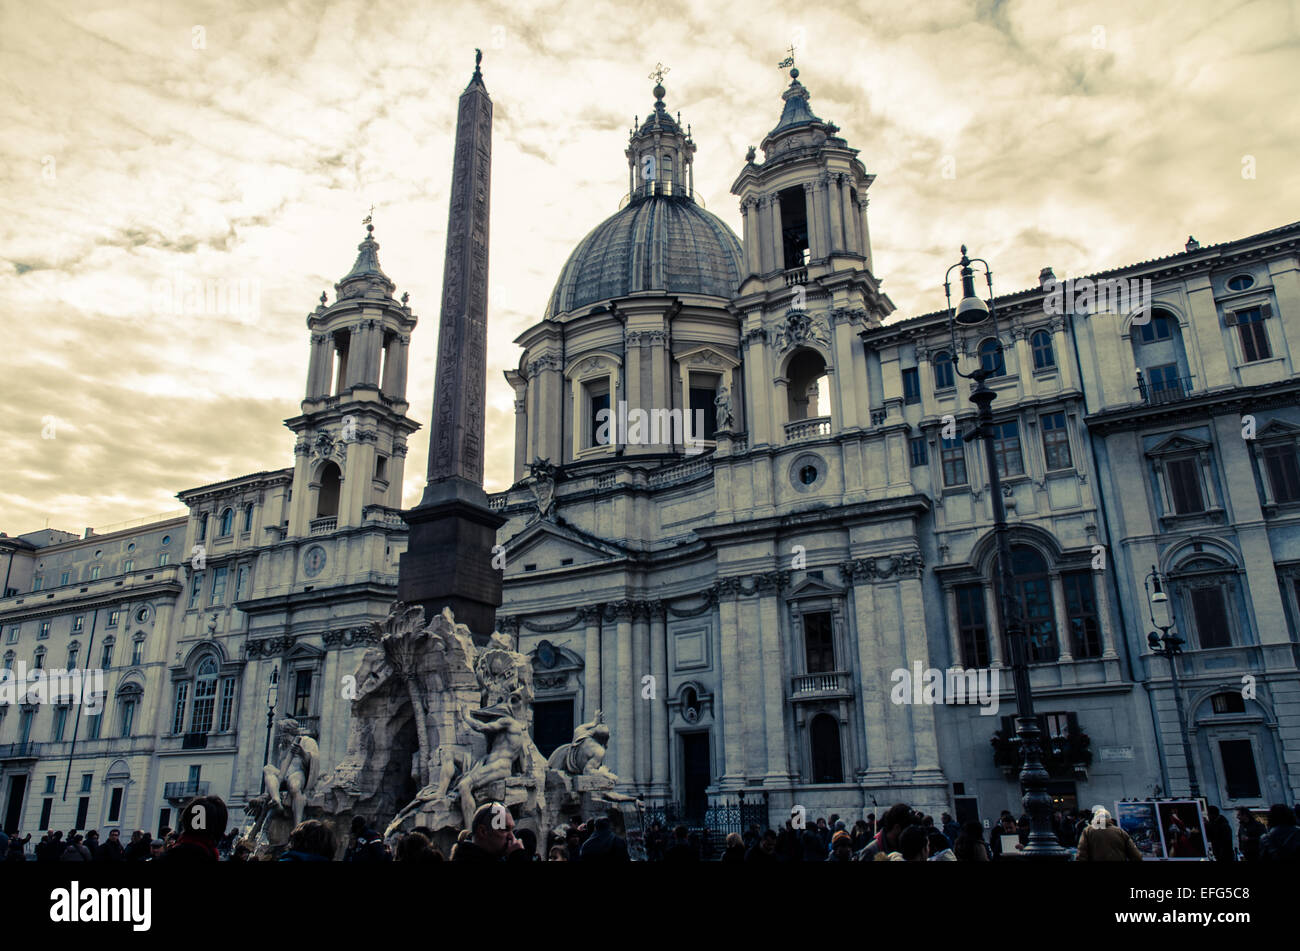 Details of Piazza Navona, Rome, Italy Stock Photo